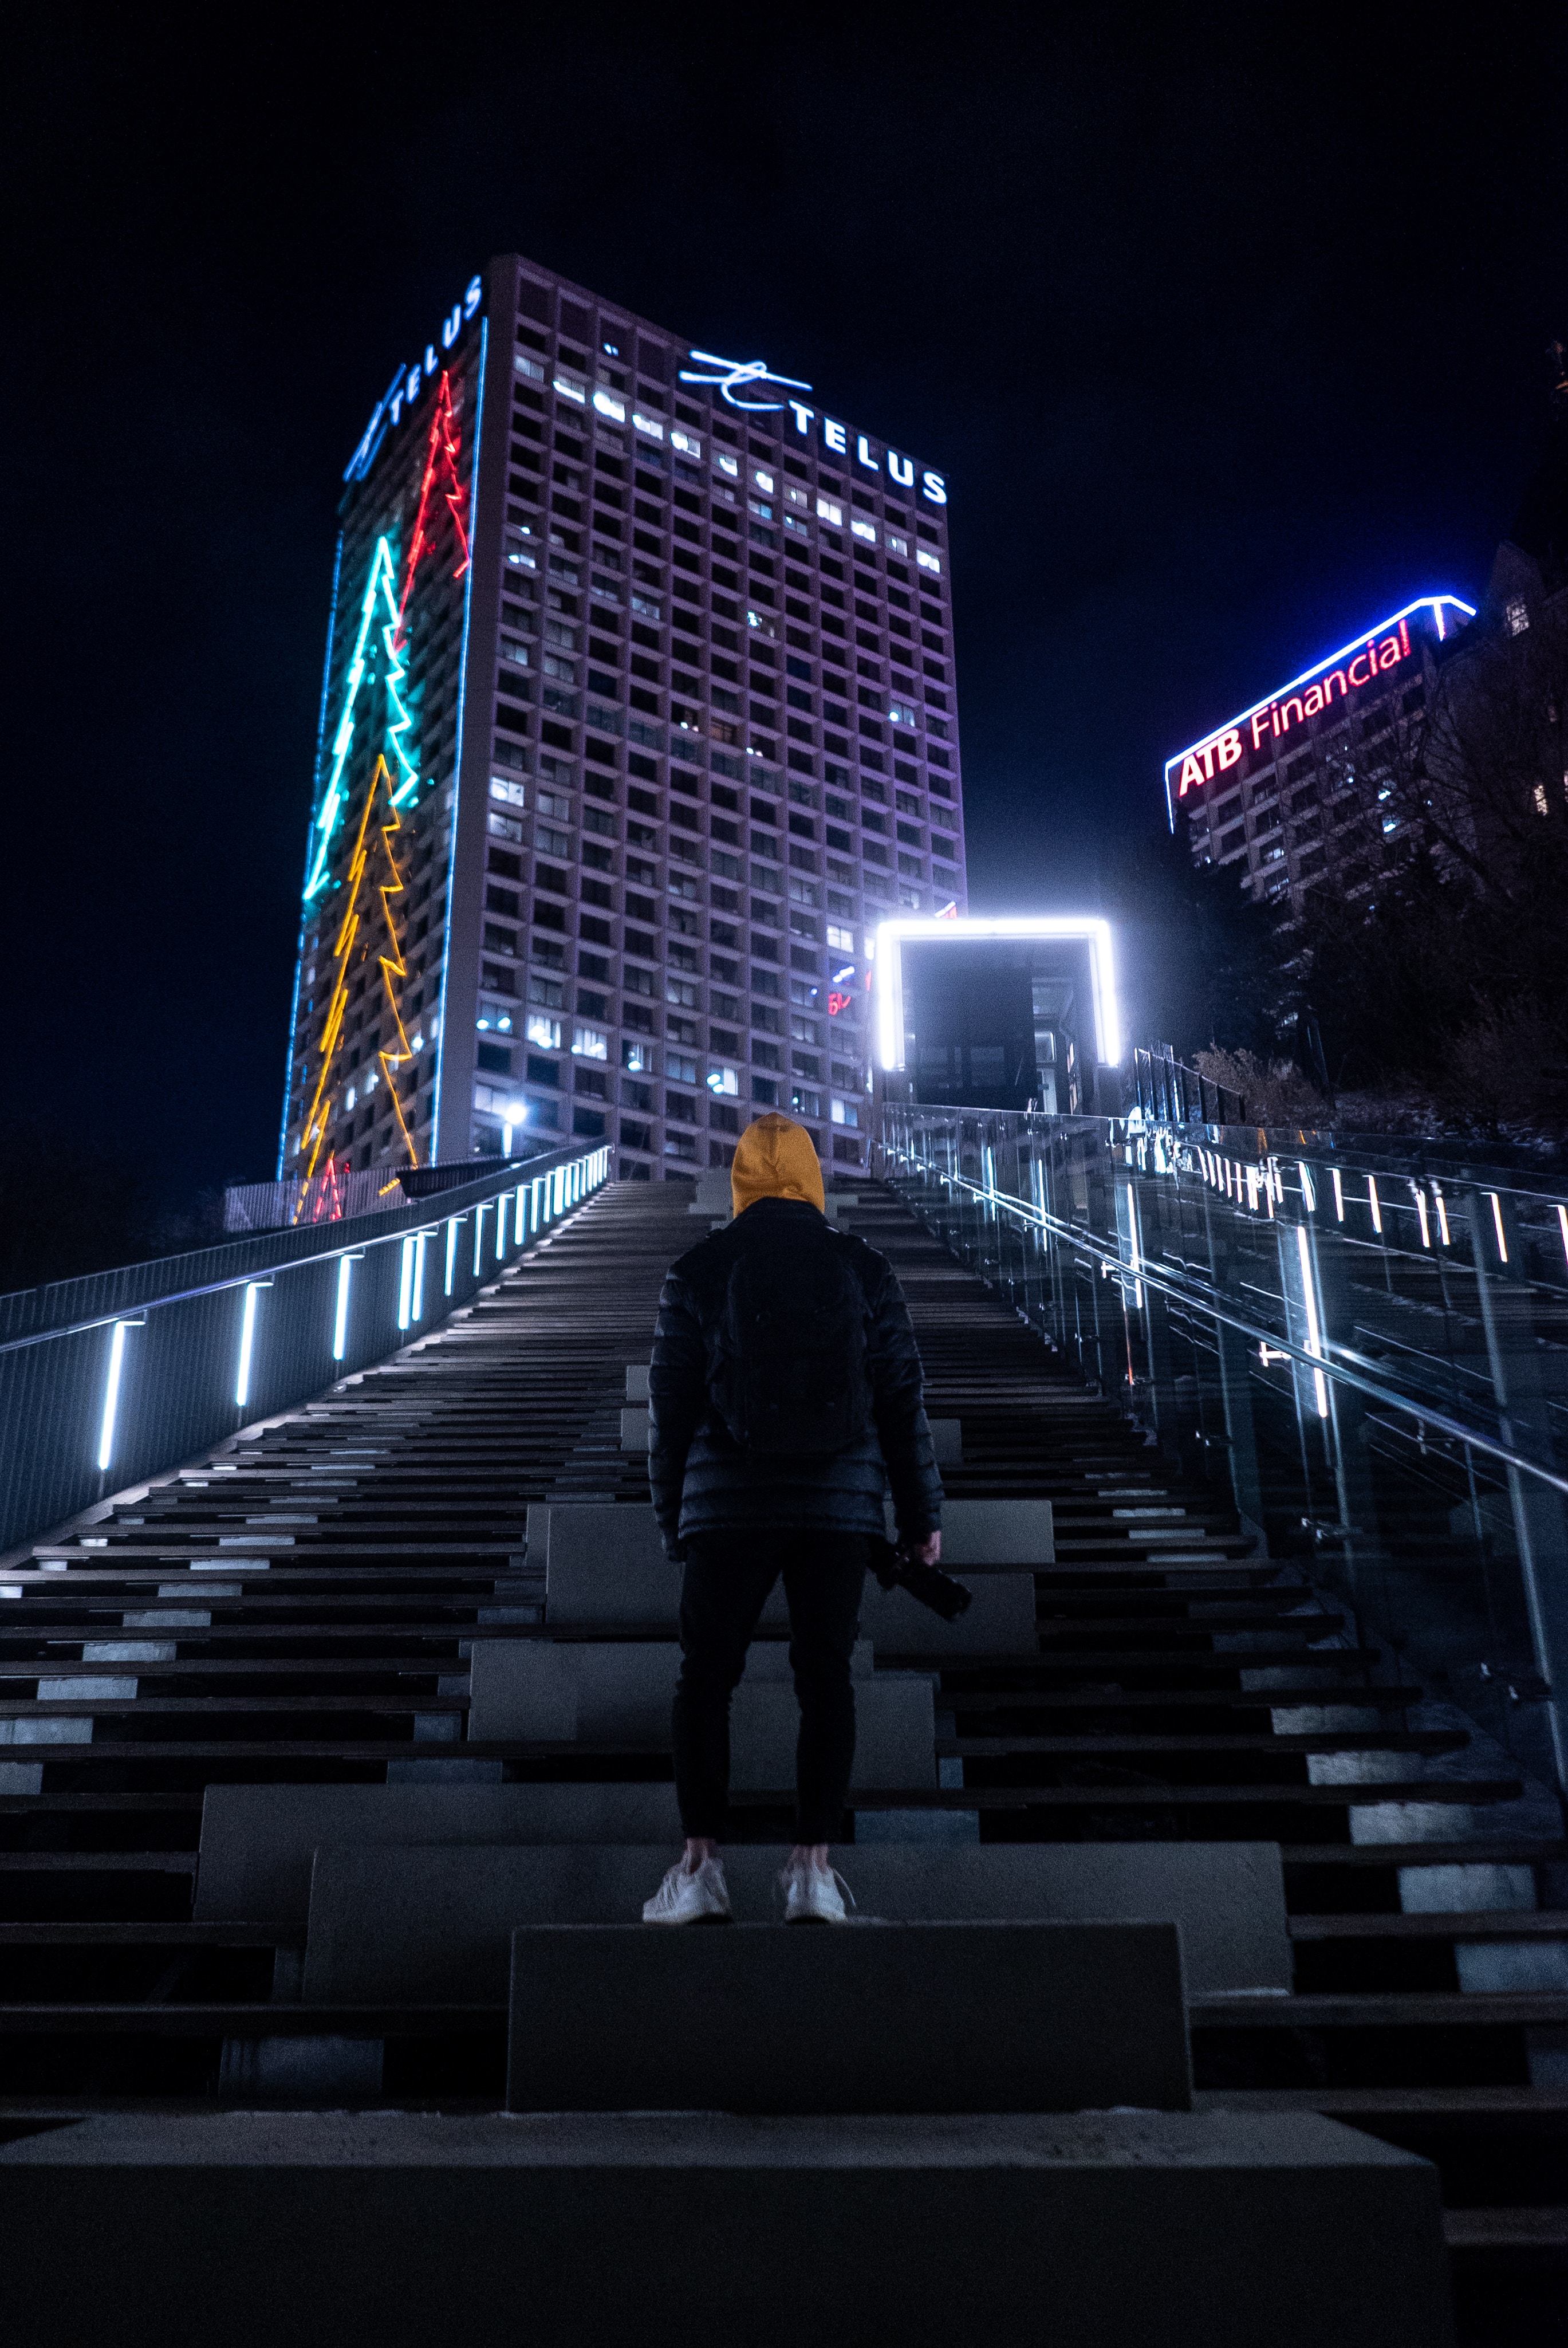 alone, dark, lonely, building, night city, human, person, hood Full HD